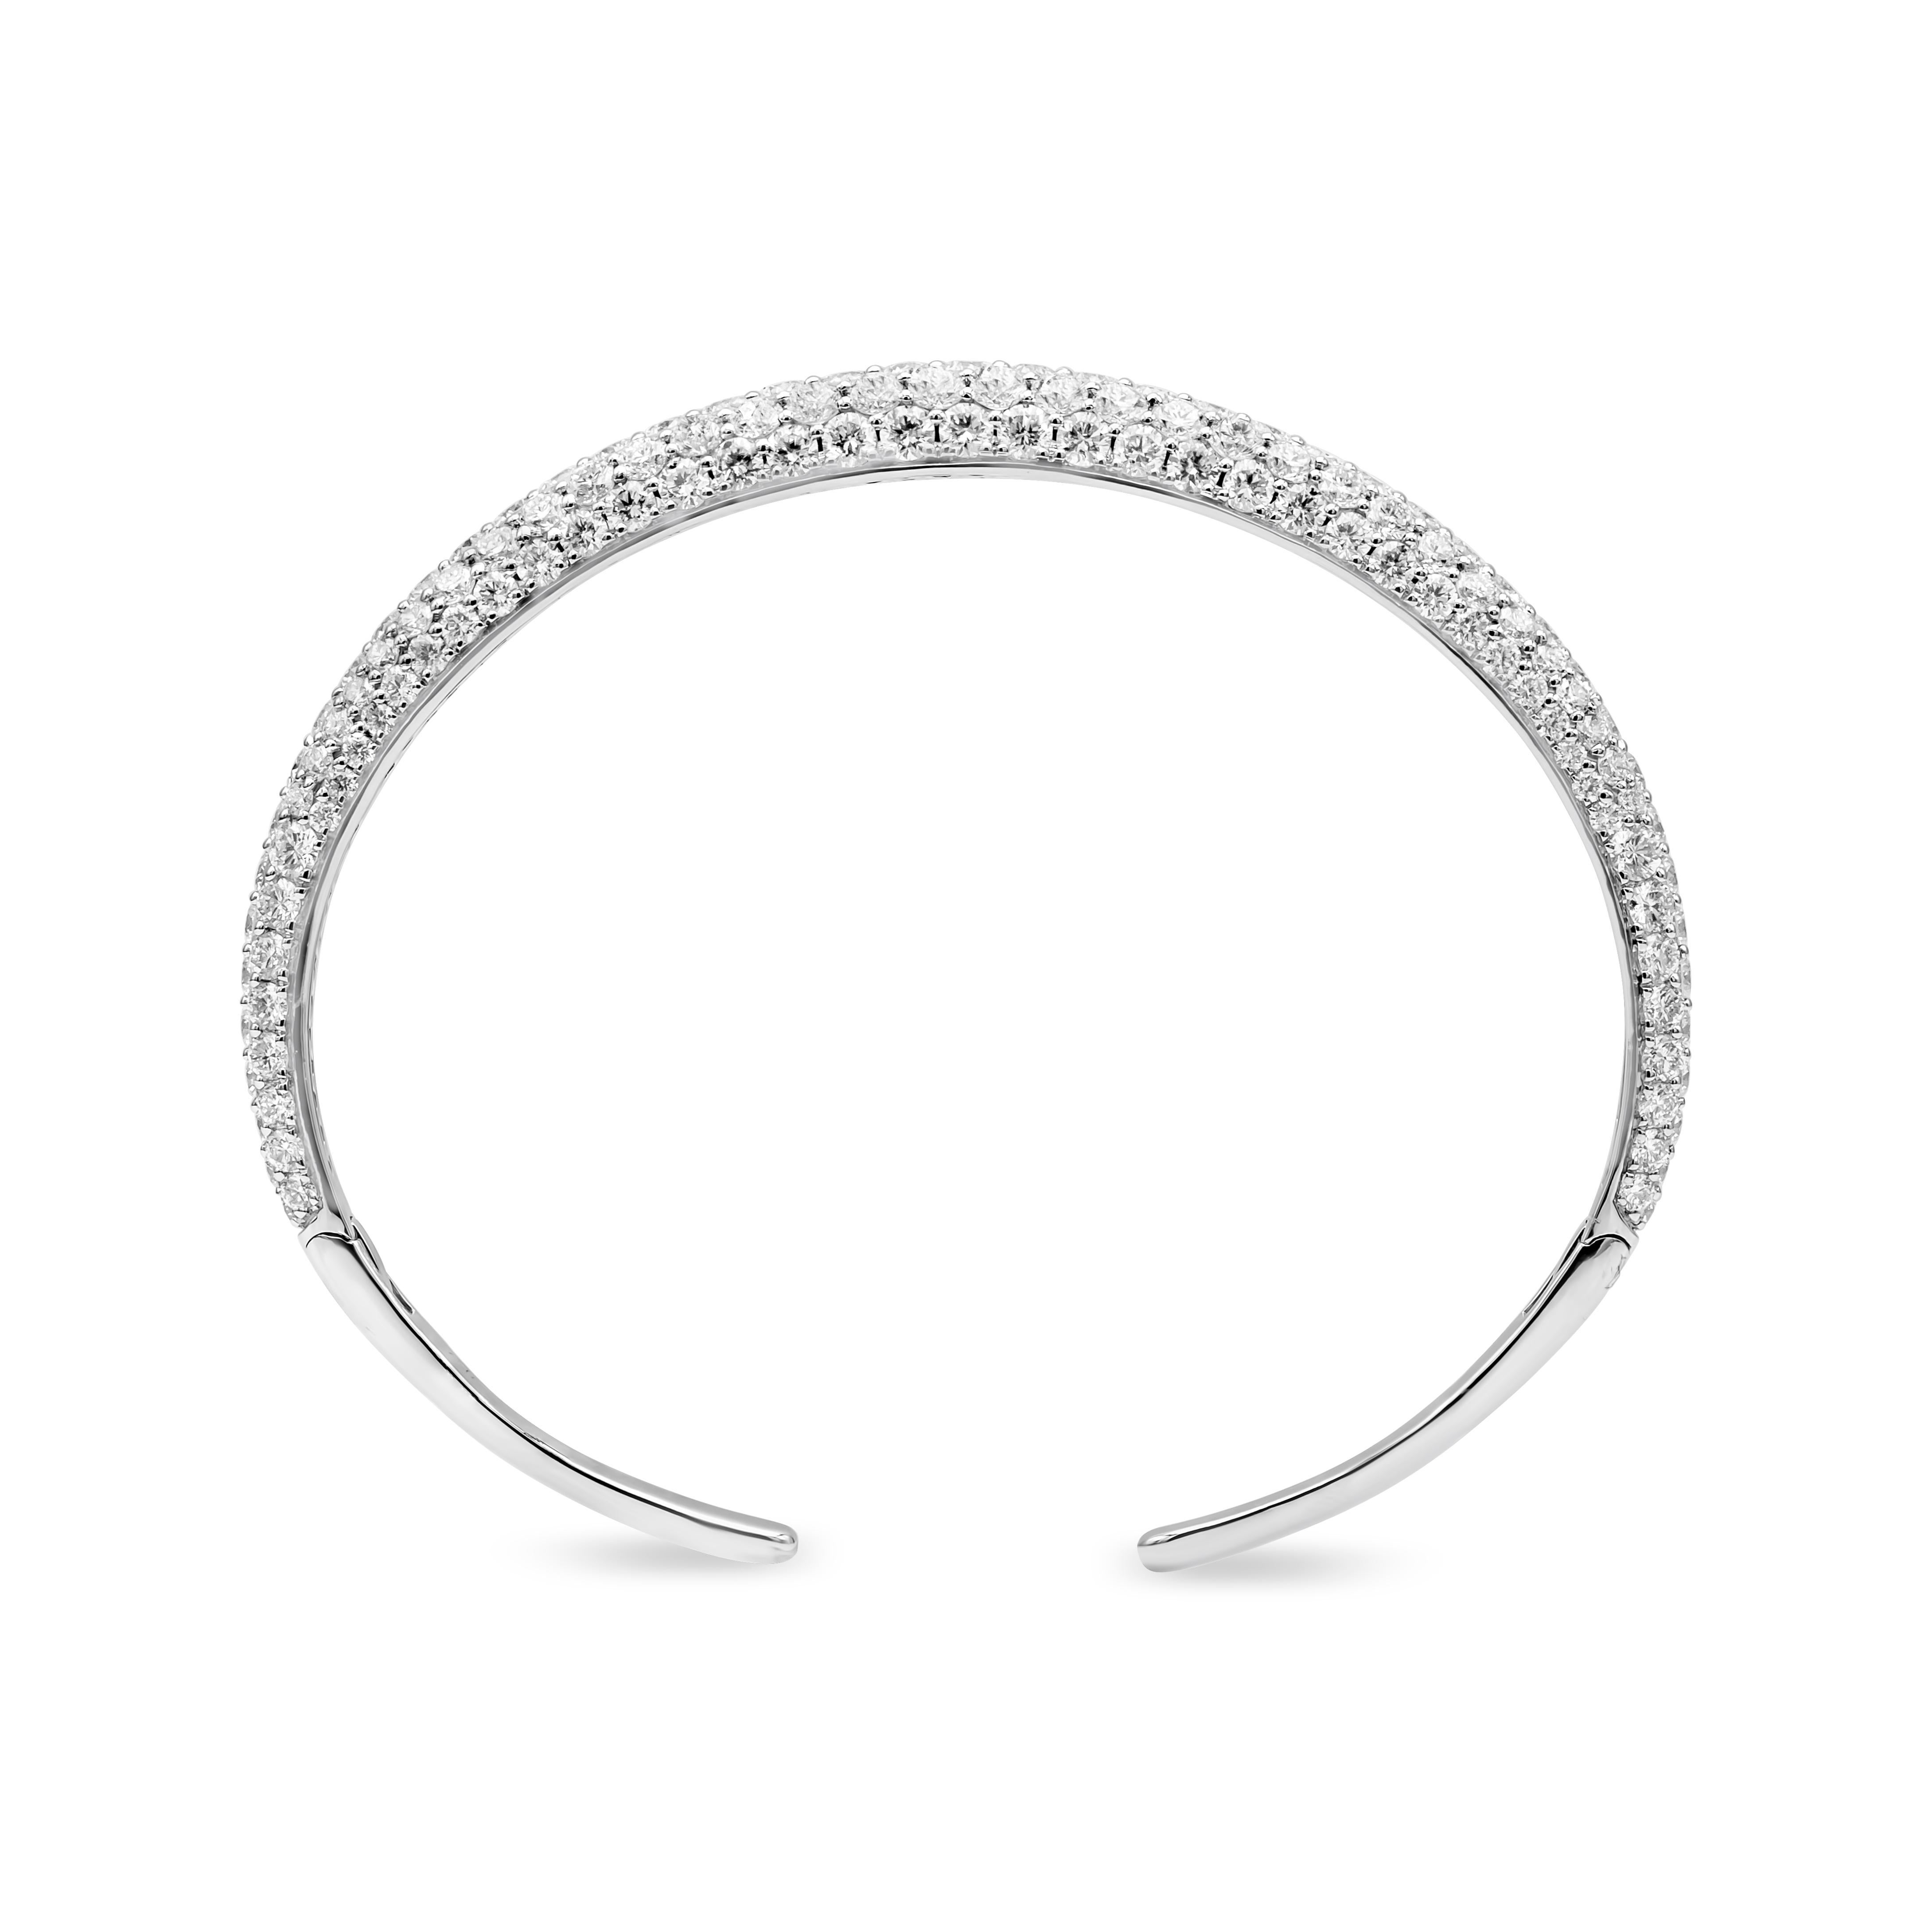 Roman Malakov 8.05 Carats Total Brilliant Round Cut Diamond Bangle Bracelet In New Condition For Sale In New York, NY